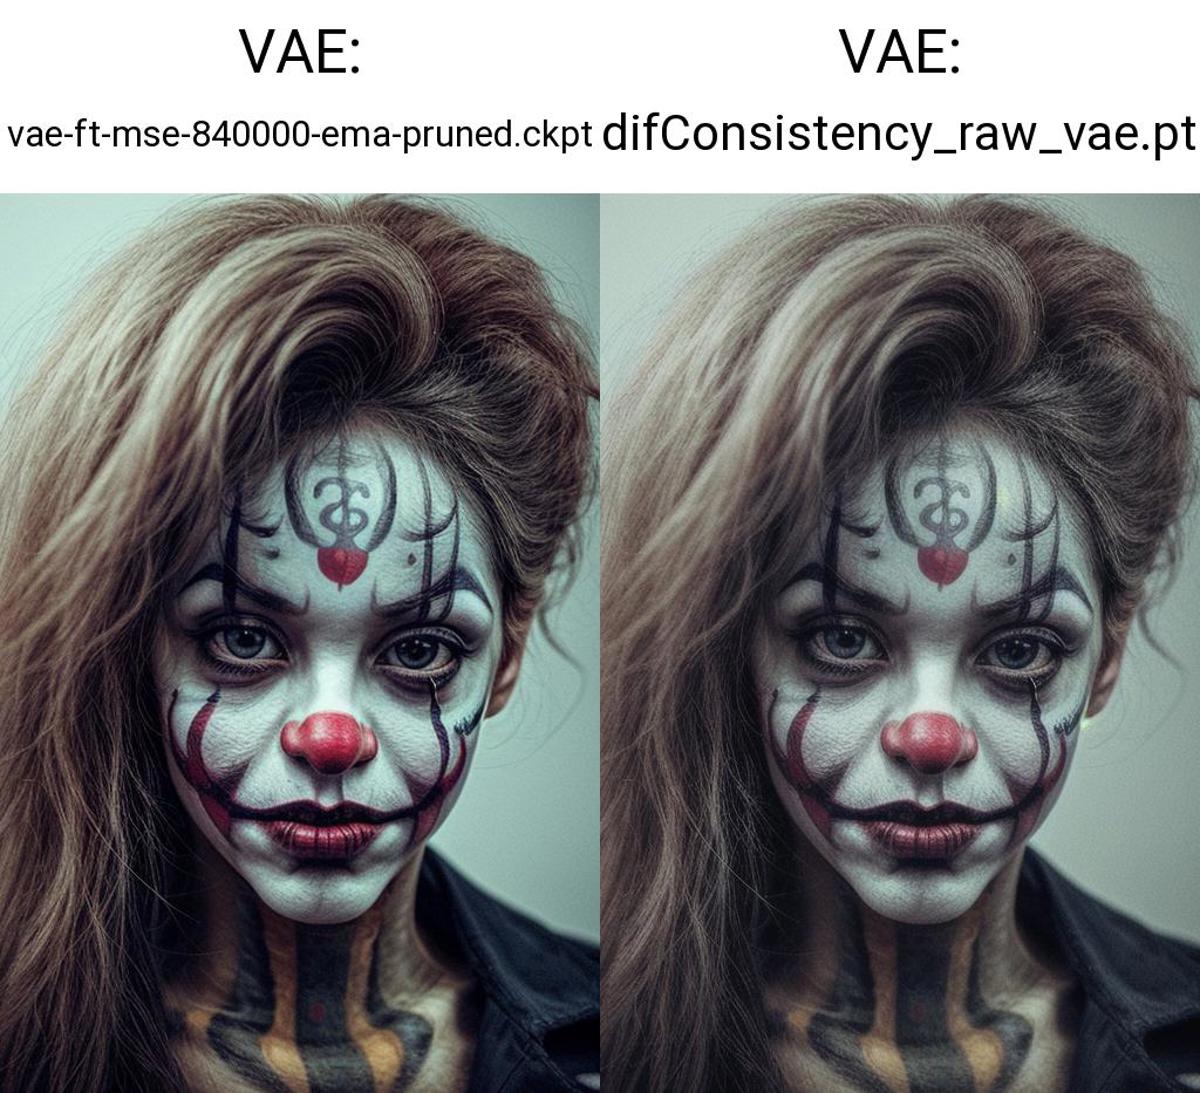 difConsistency RAW VAE (Pack) image by rMada